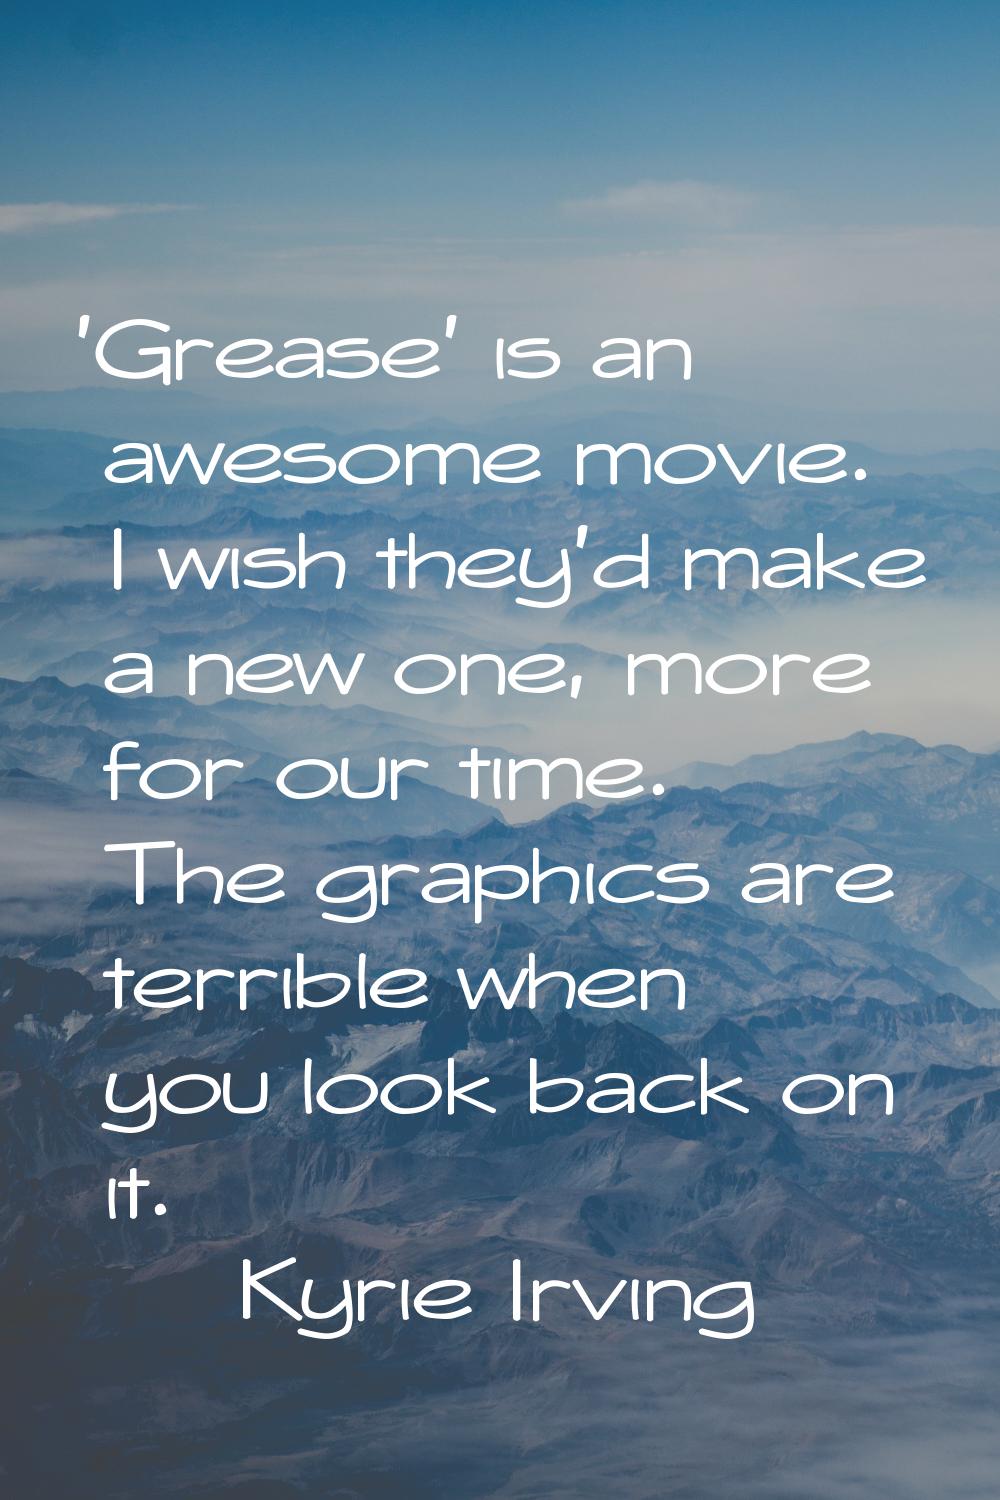 'Grease' is an awesome movie. I wish they'd make a new one, more for our time. The graphics are ter